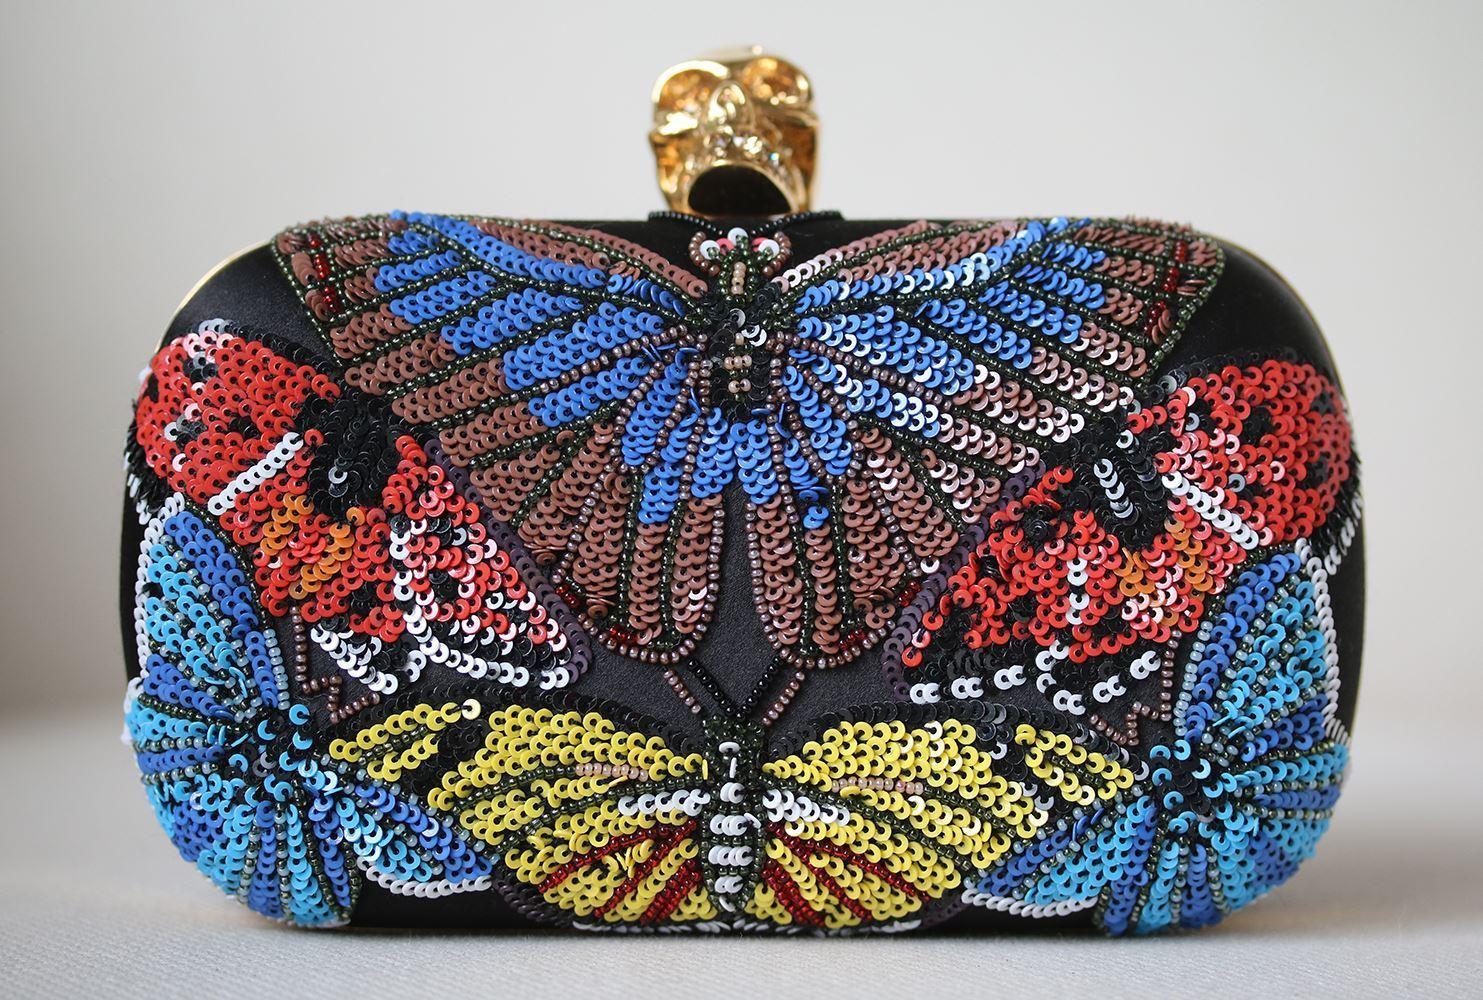 Black and multicolour beaded butterfly embroidery Classic Skull Clutch. Features Swarovski crystal detail skull clasp closure. Satin body of the clutch and a chain strap. Brass hardware with a gold finish. 80% Brass, 20% satin. Does not come with a